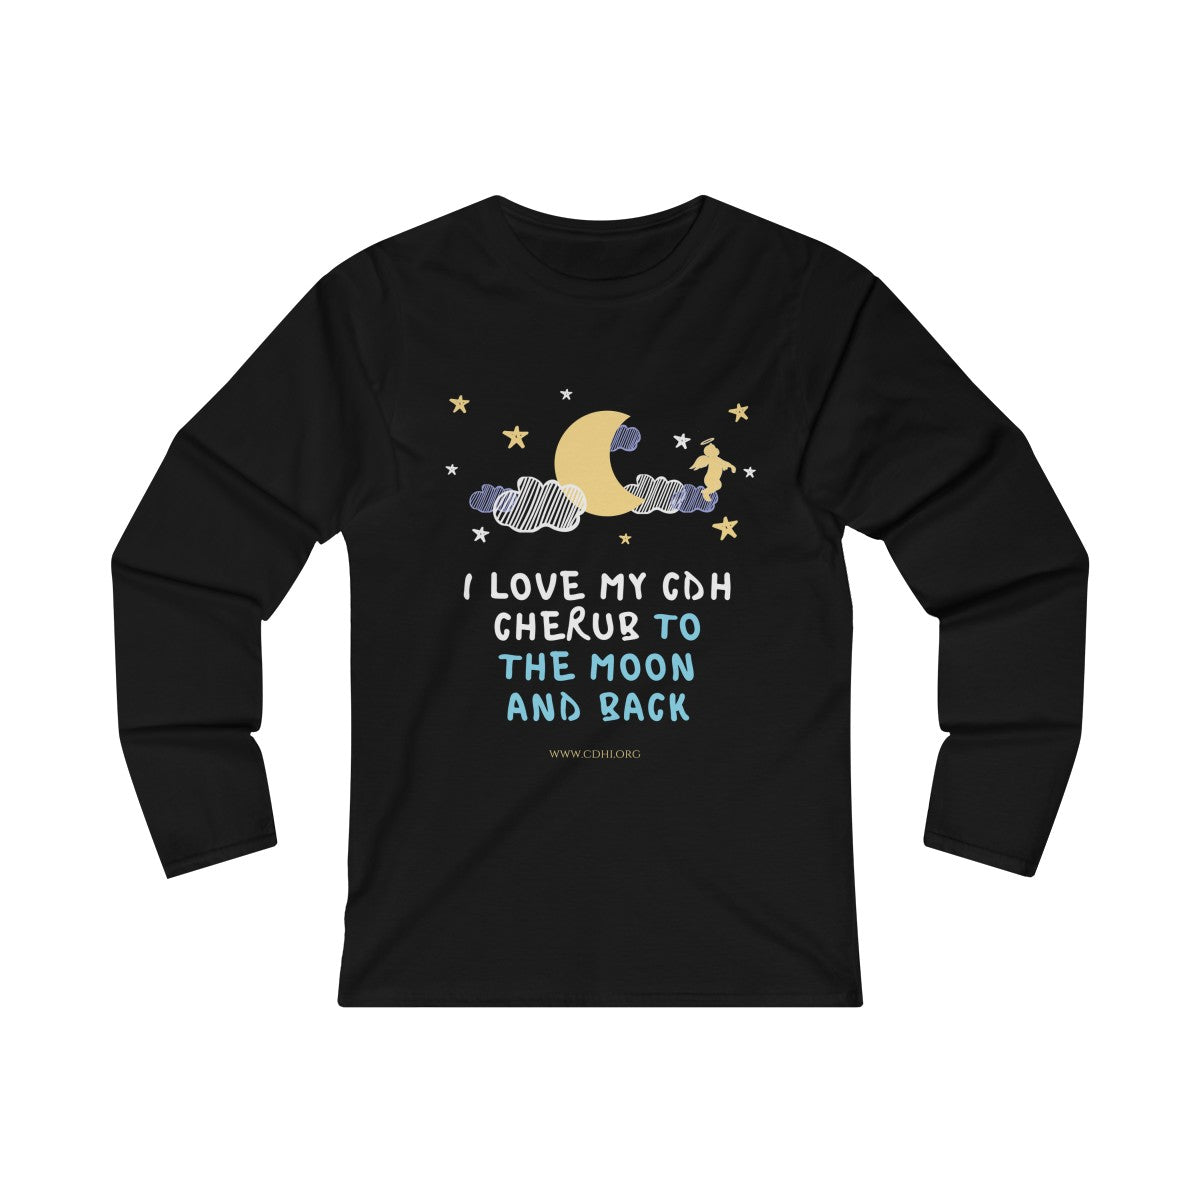 "To The Moon and Back" Women's Fitted Long Sleeve Tee (UK Printing) - CDH International